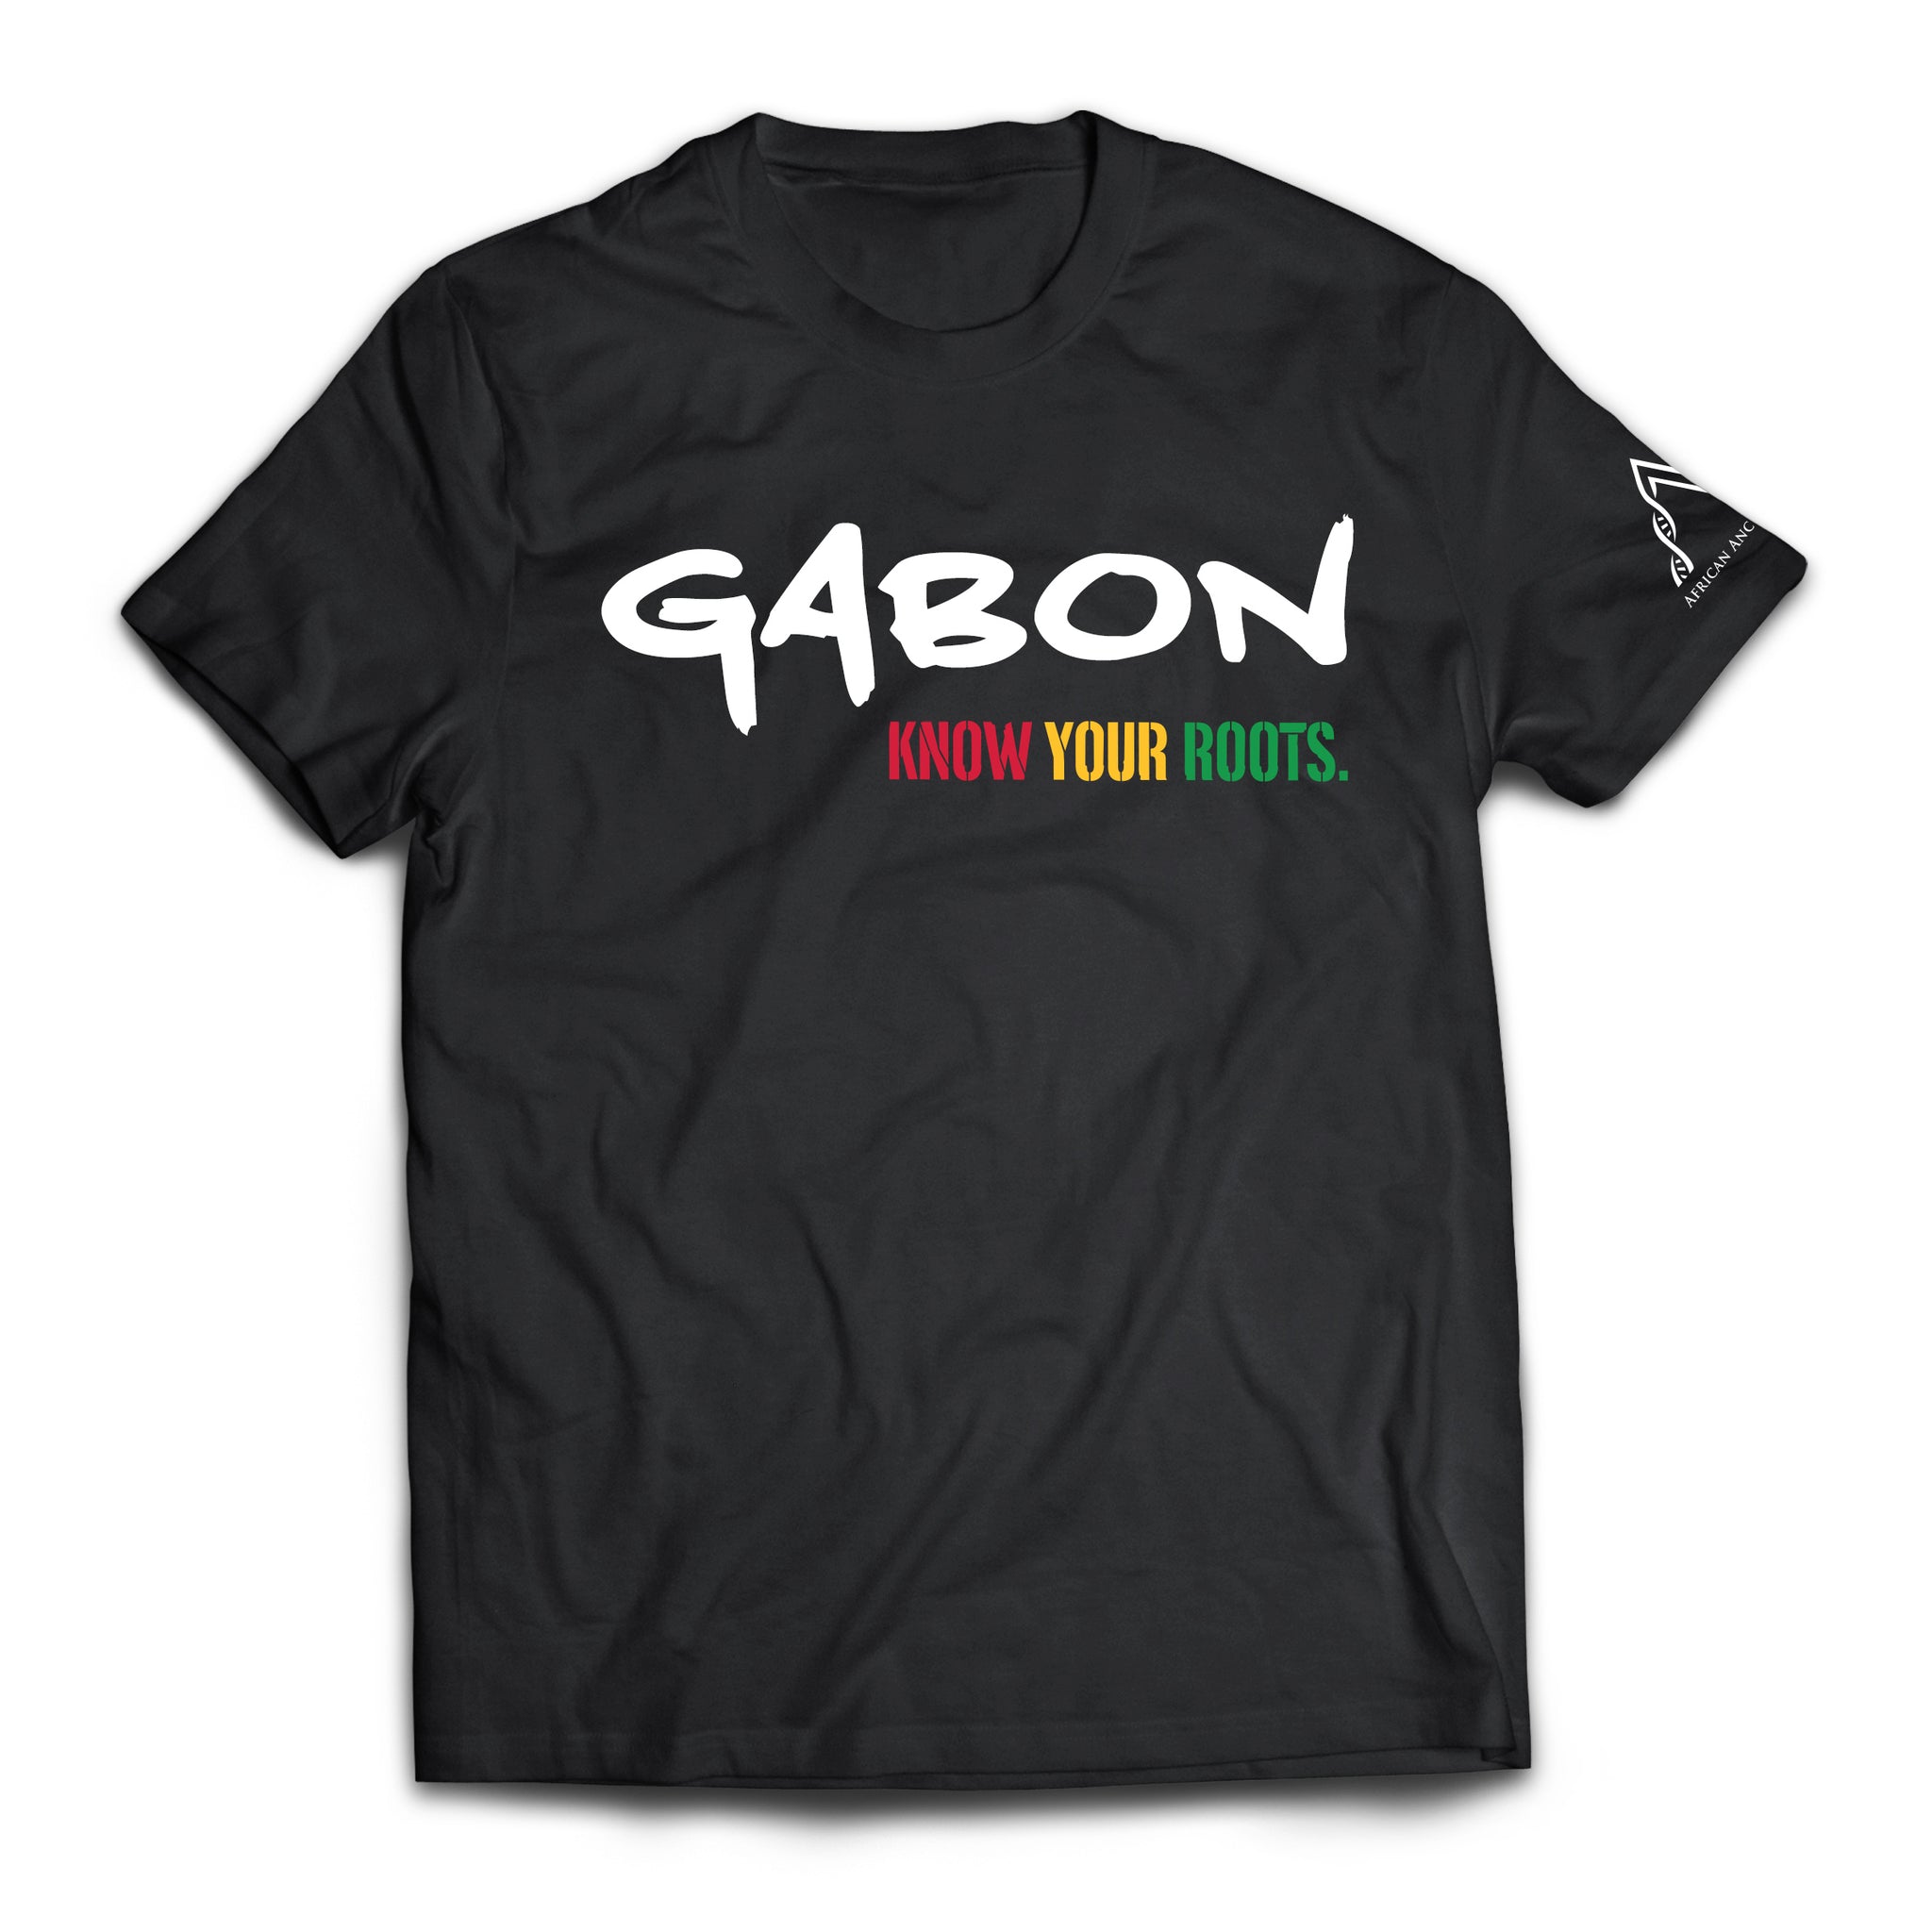 African Ancestry Gabon T-Shirt with "Know Your Roots" in African colors